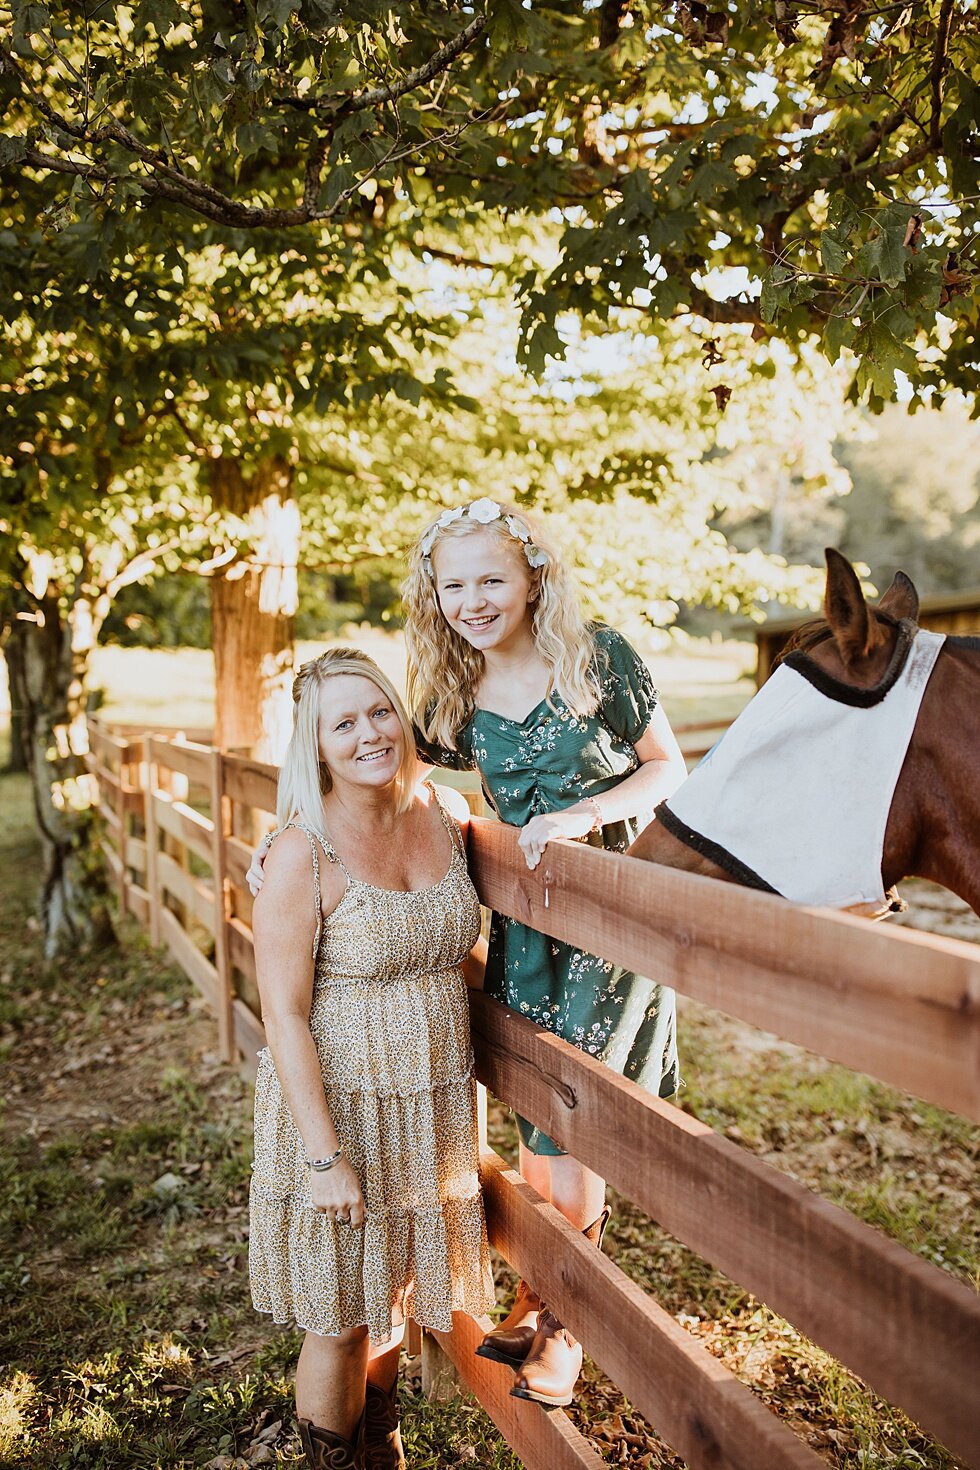  Added element of horses in this mother and daughter photo session as they pose with the animals in the background. Fall Louisville Kentucky photographer mother daughter photography session portraits loving relationship western girls country roots #m